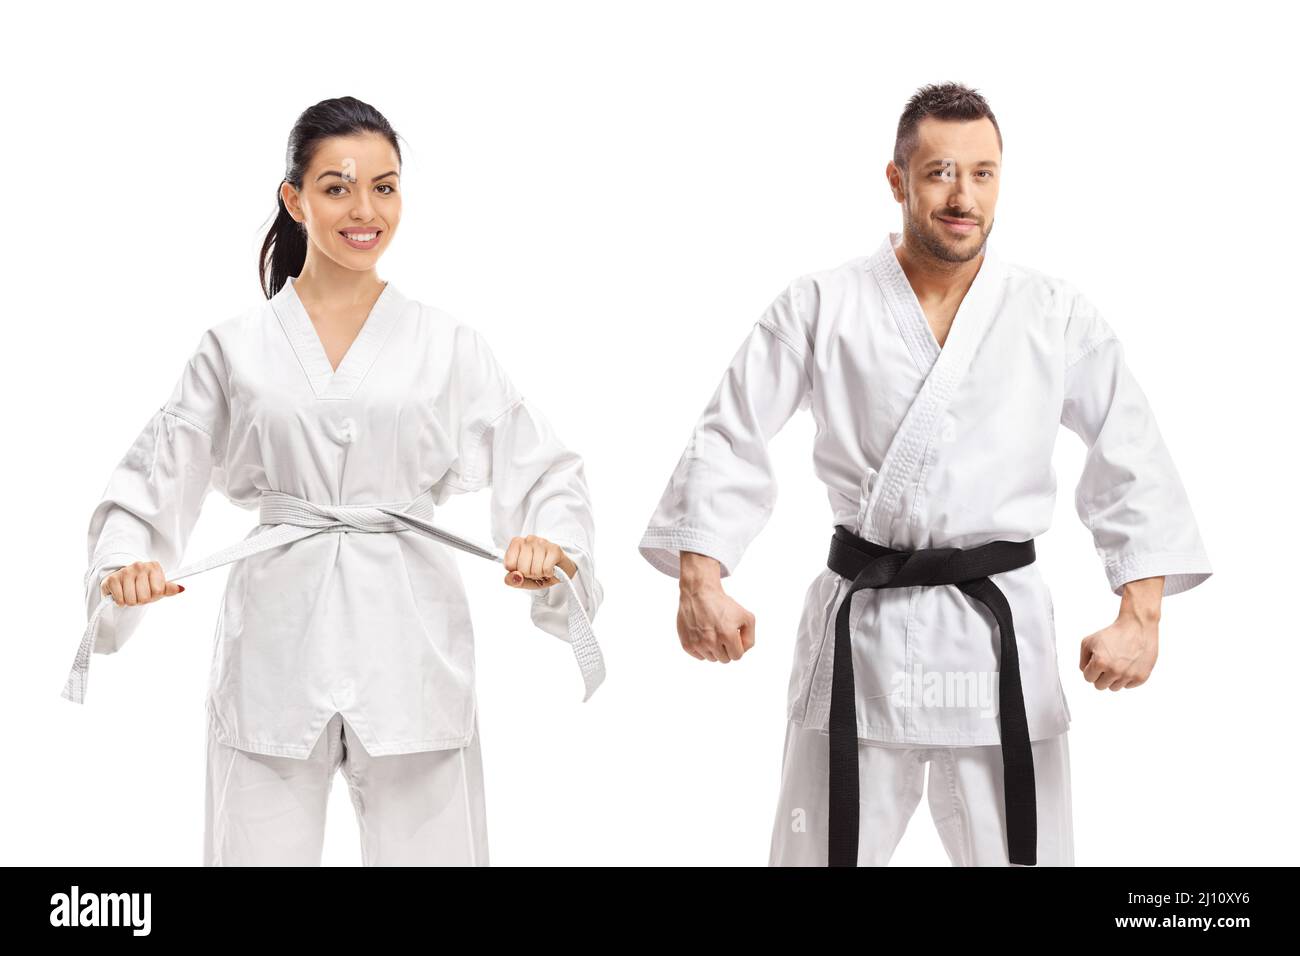 Woman with white karate belt and man with karate black belt isolated on white background Stock Photo